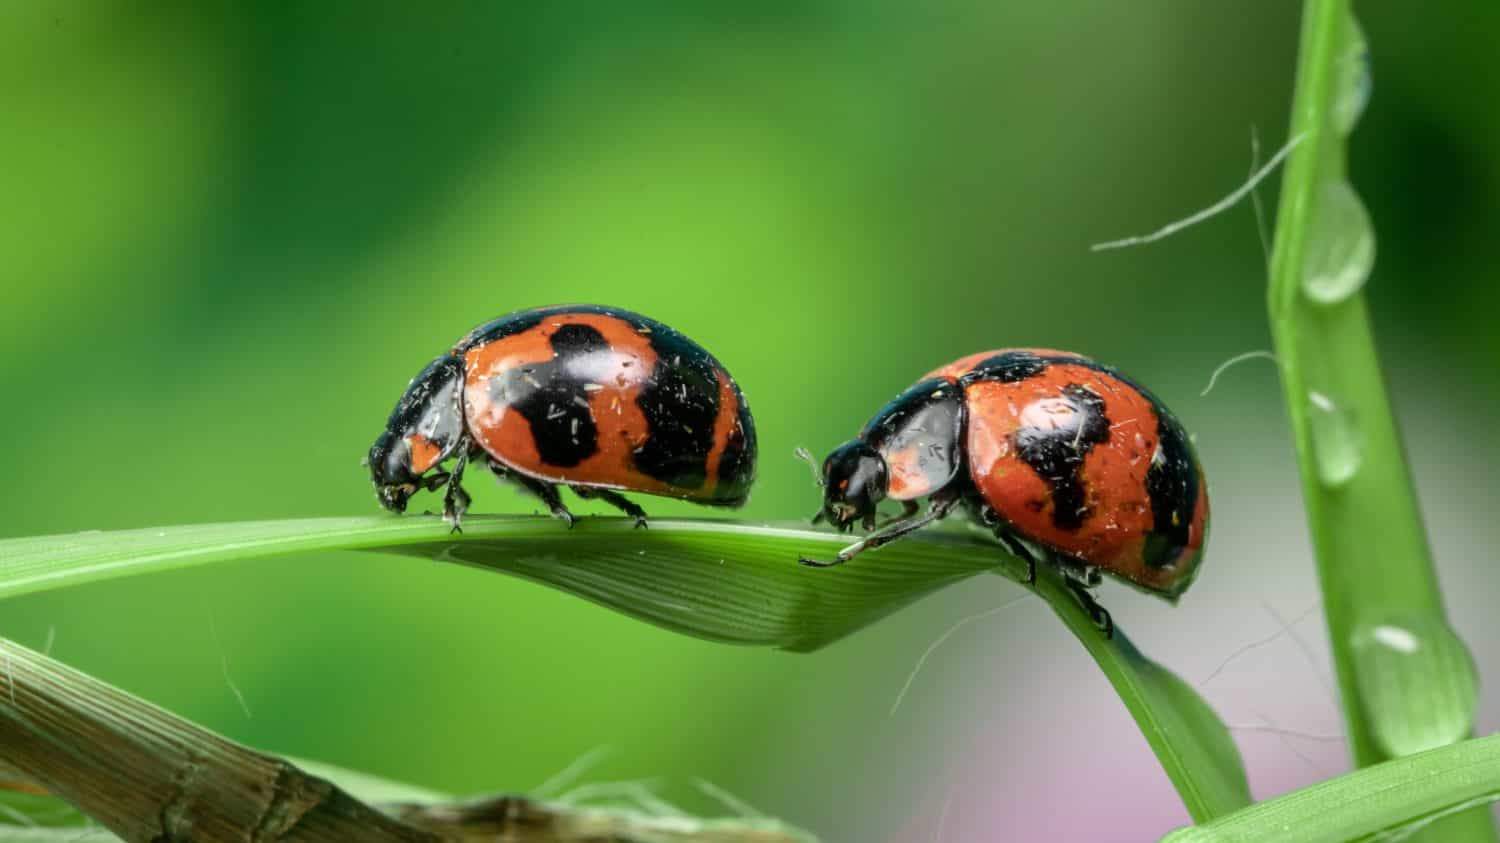 Ladybugs generally oval shaped with domed backs and flattened undersides.Females tend to be larger than males.